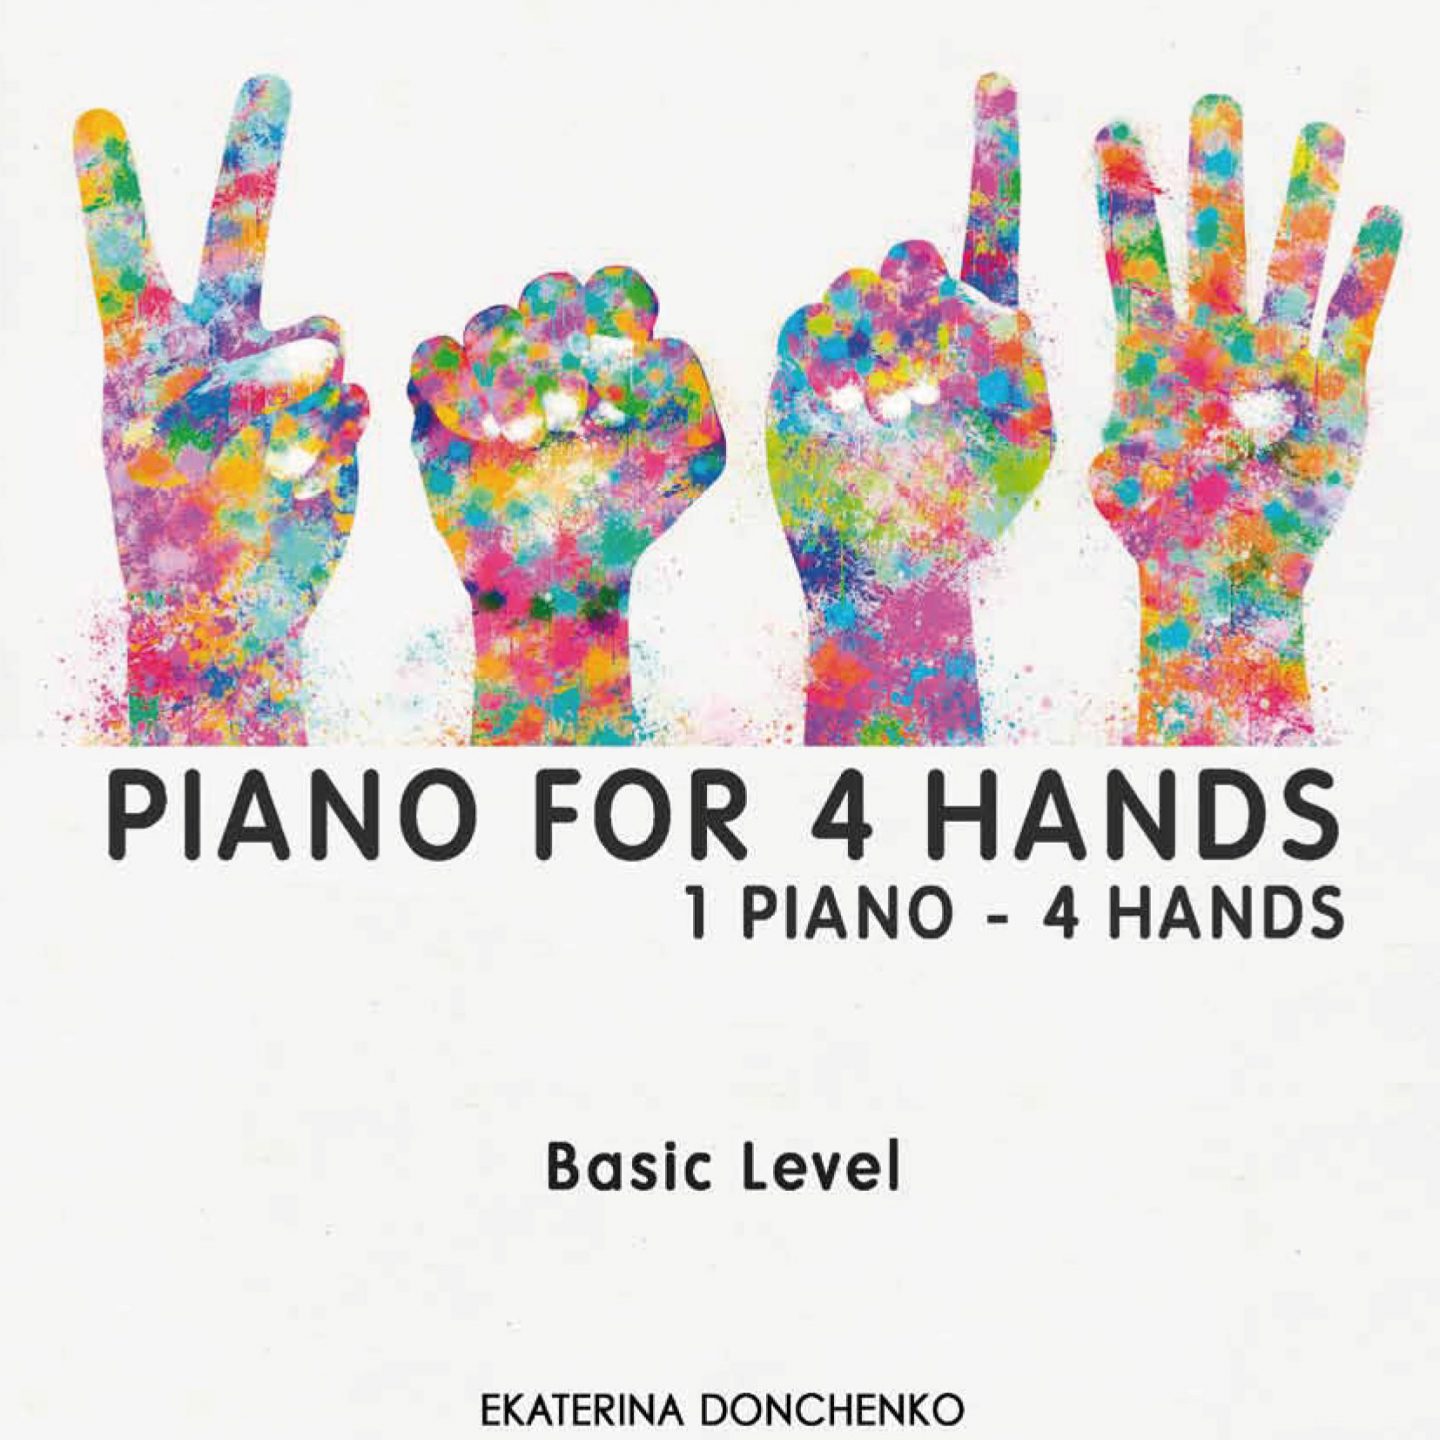 PIANO FOR 4 HANDS